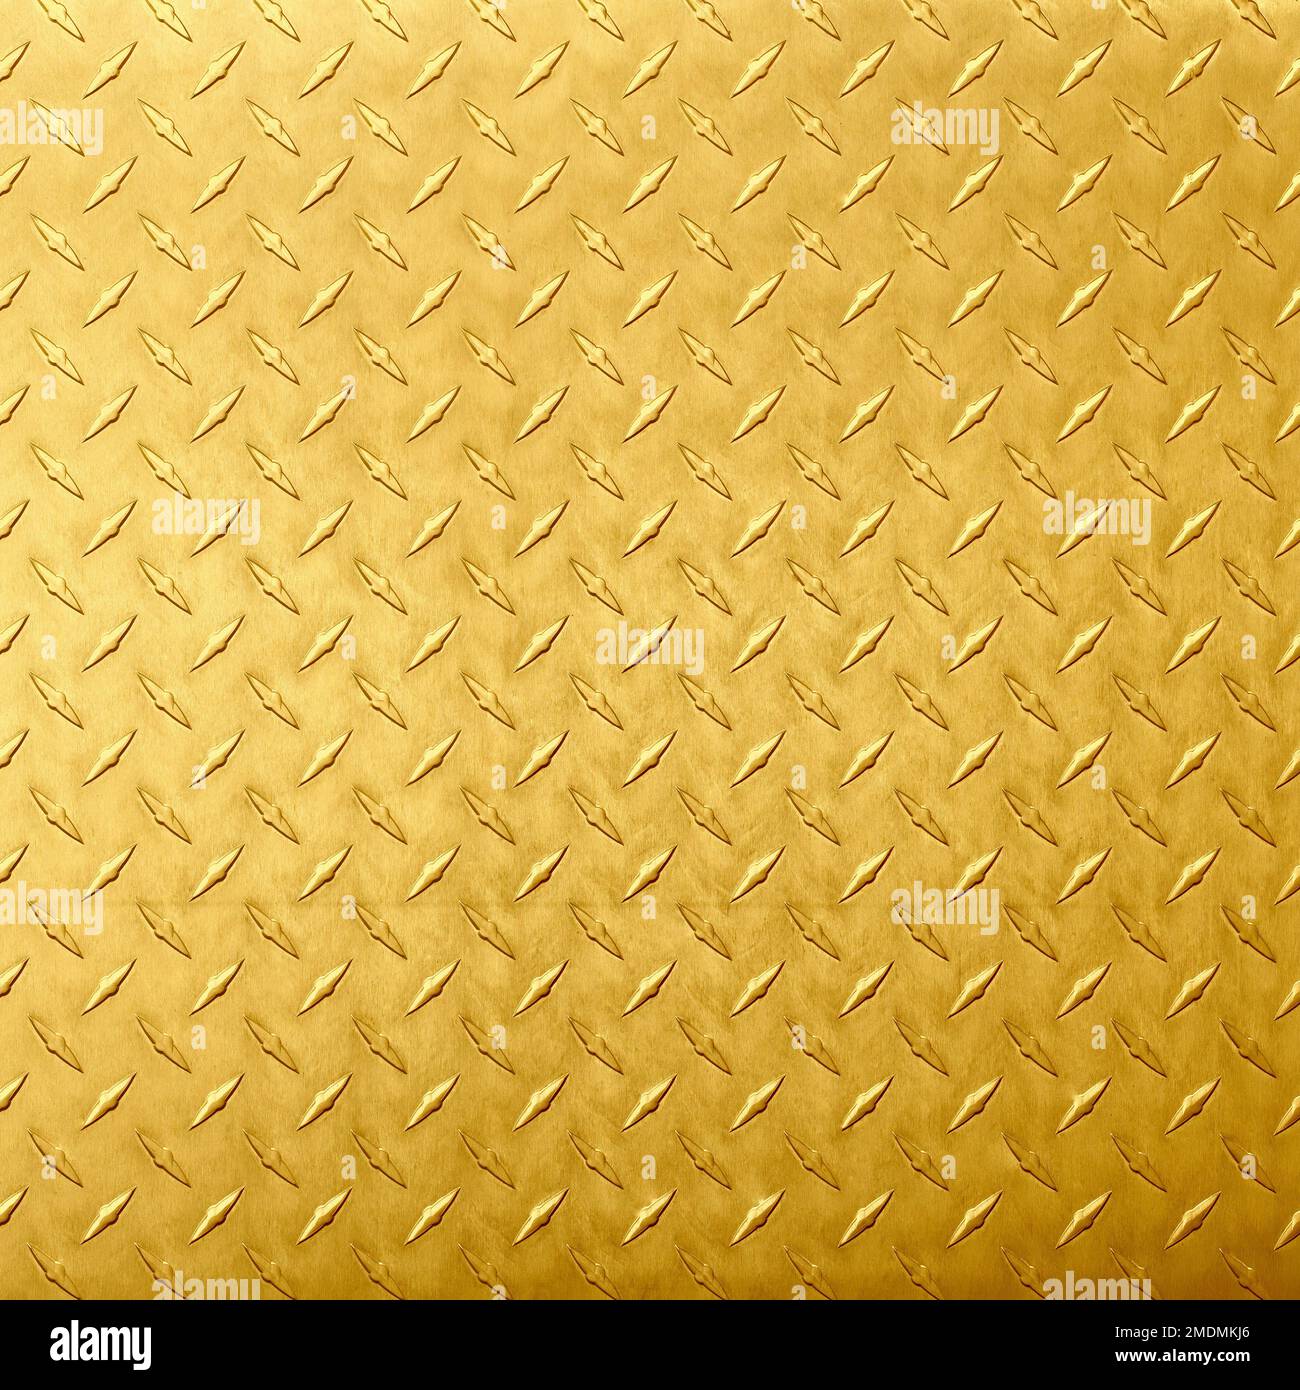 golden metal texture with rhombic pattern. brass or gold background Stock Photo